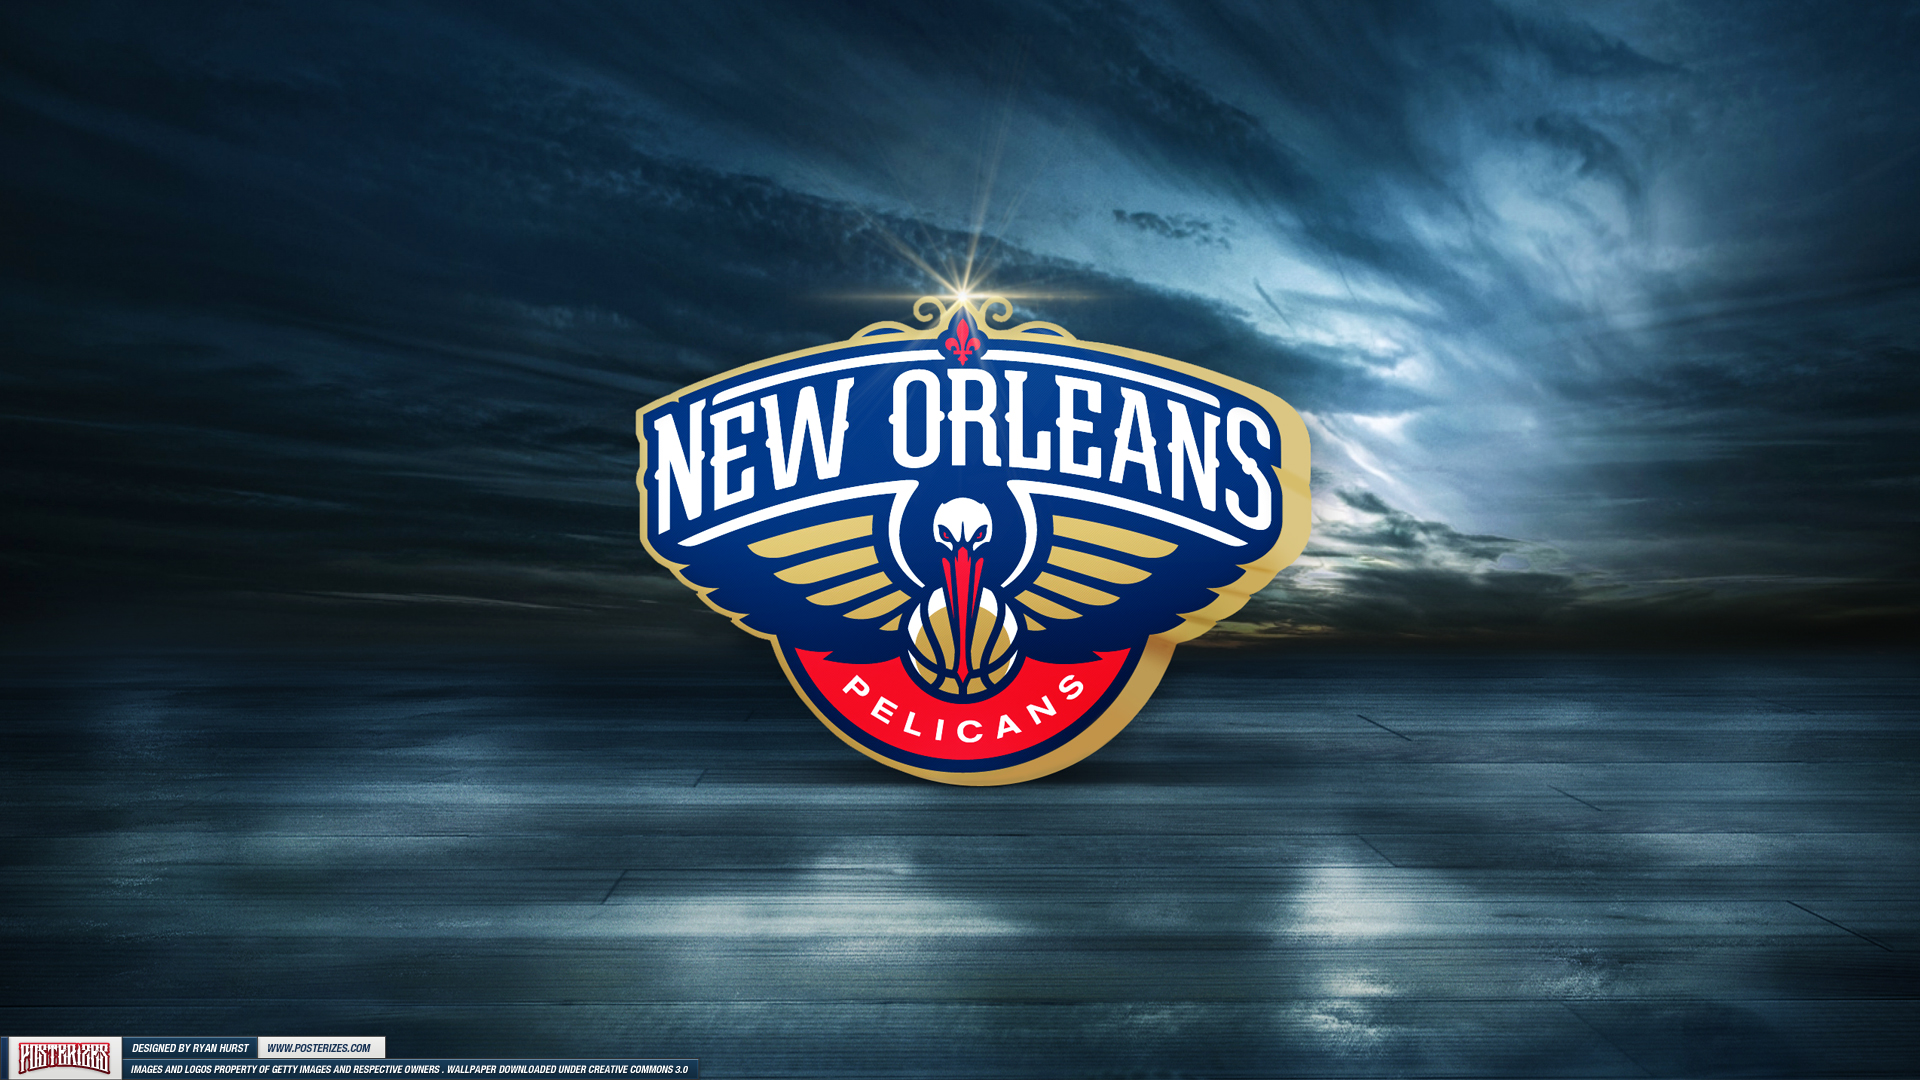 New Orleans Pelicans Wallpaper On